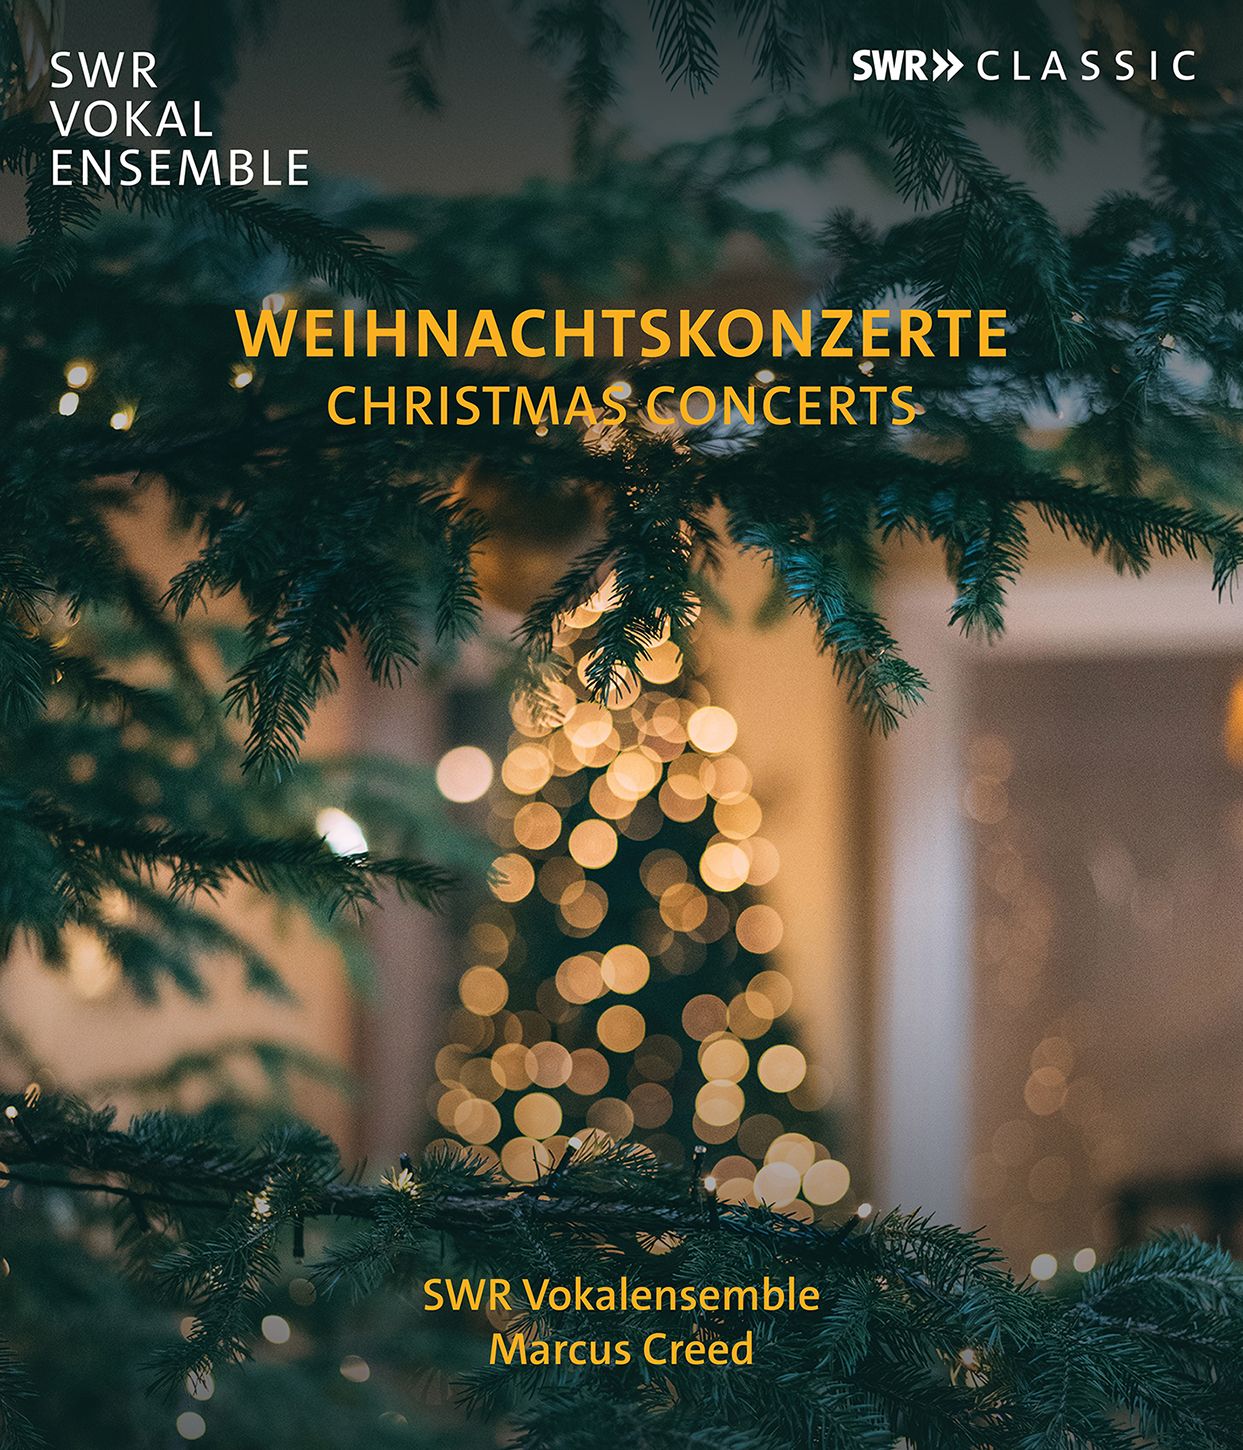 Christmas Concerts from the SWR Vocal Ensemble